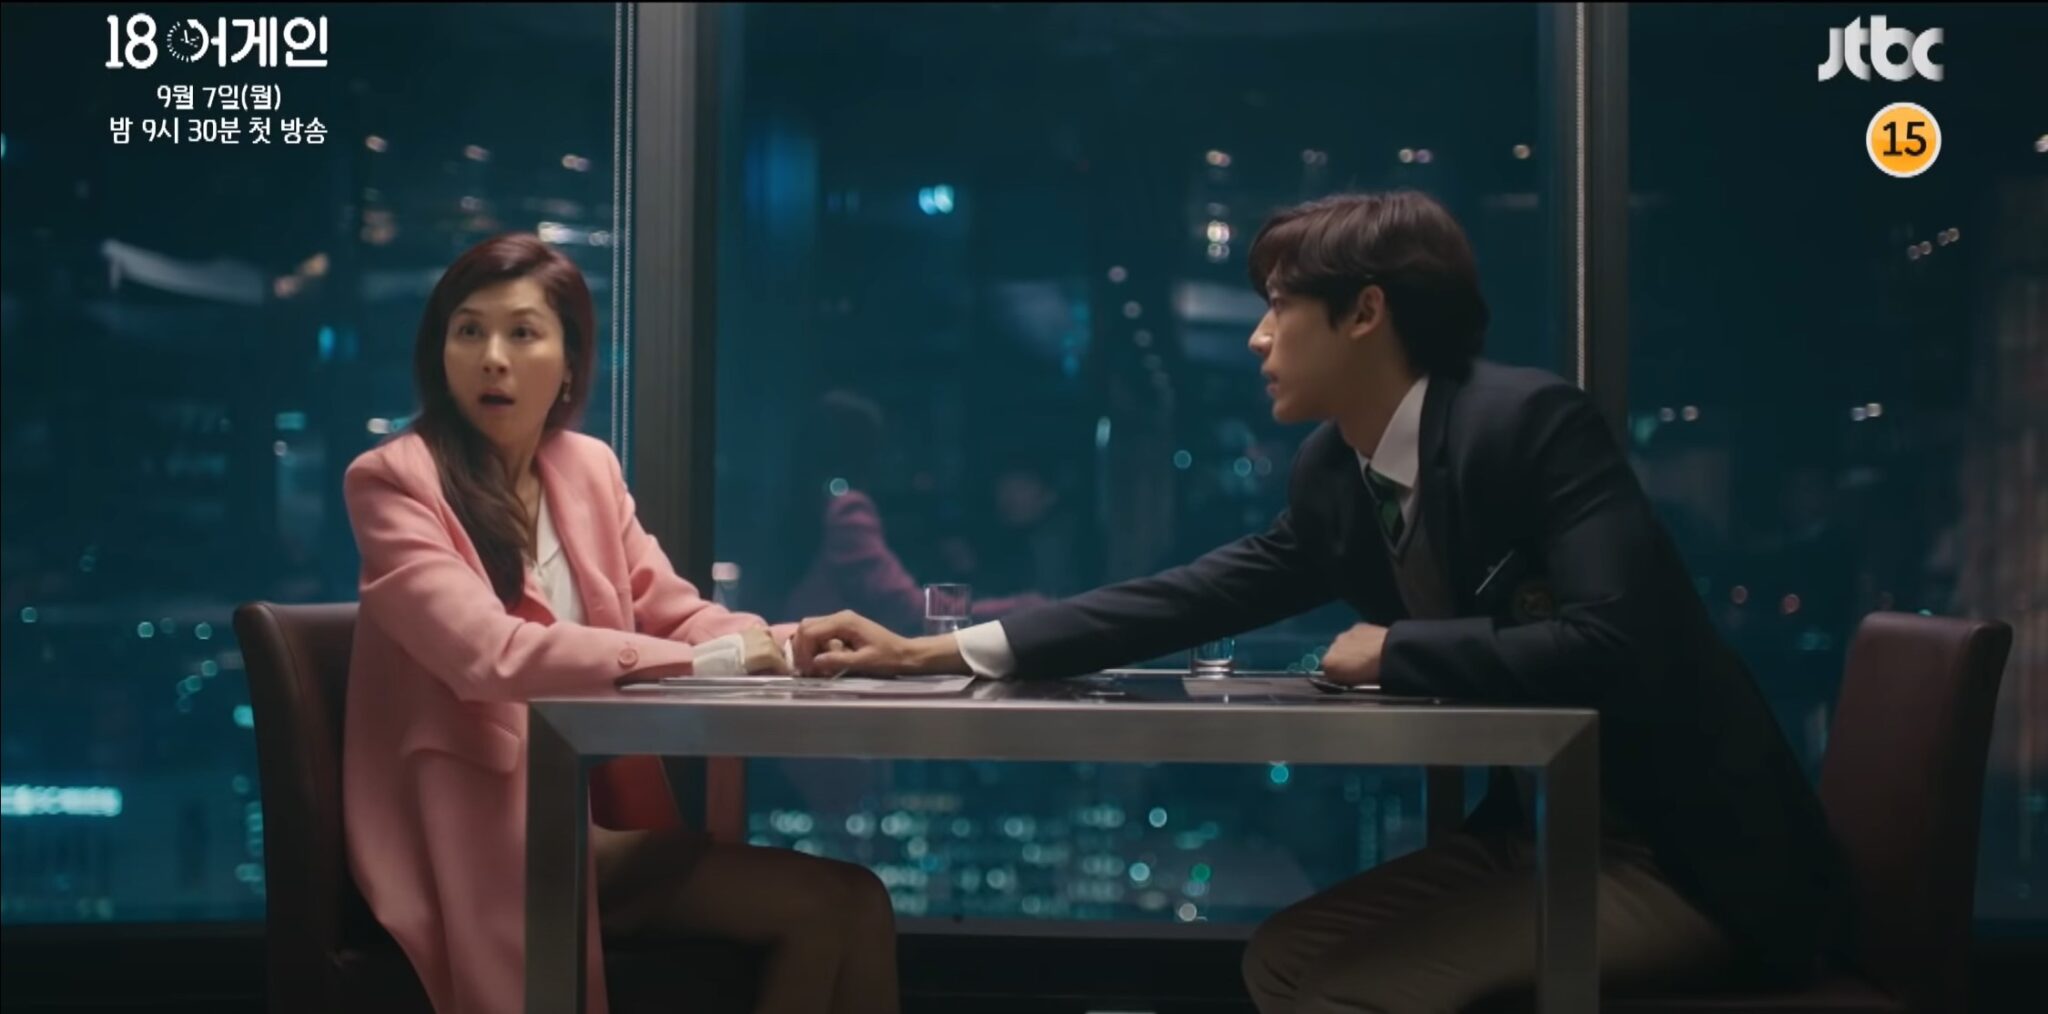 Kim Haneul Gets A Confession Of Love From Yoon Sang Hyun Lee Do Hyun In Latest 18 Again Teaser 2324